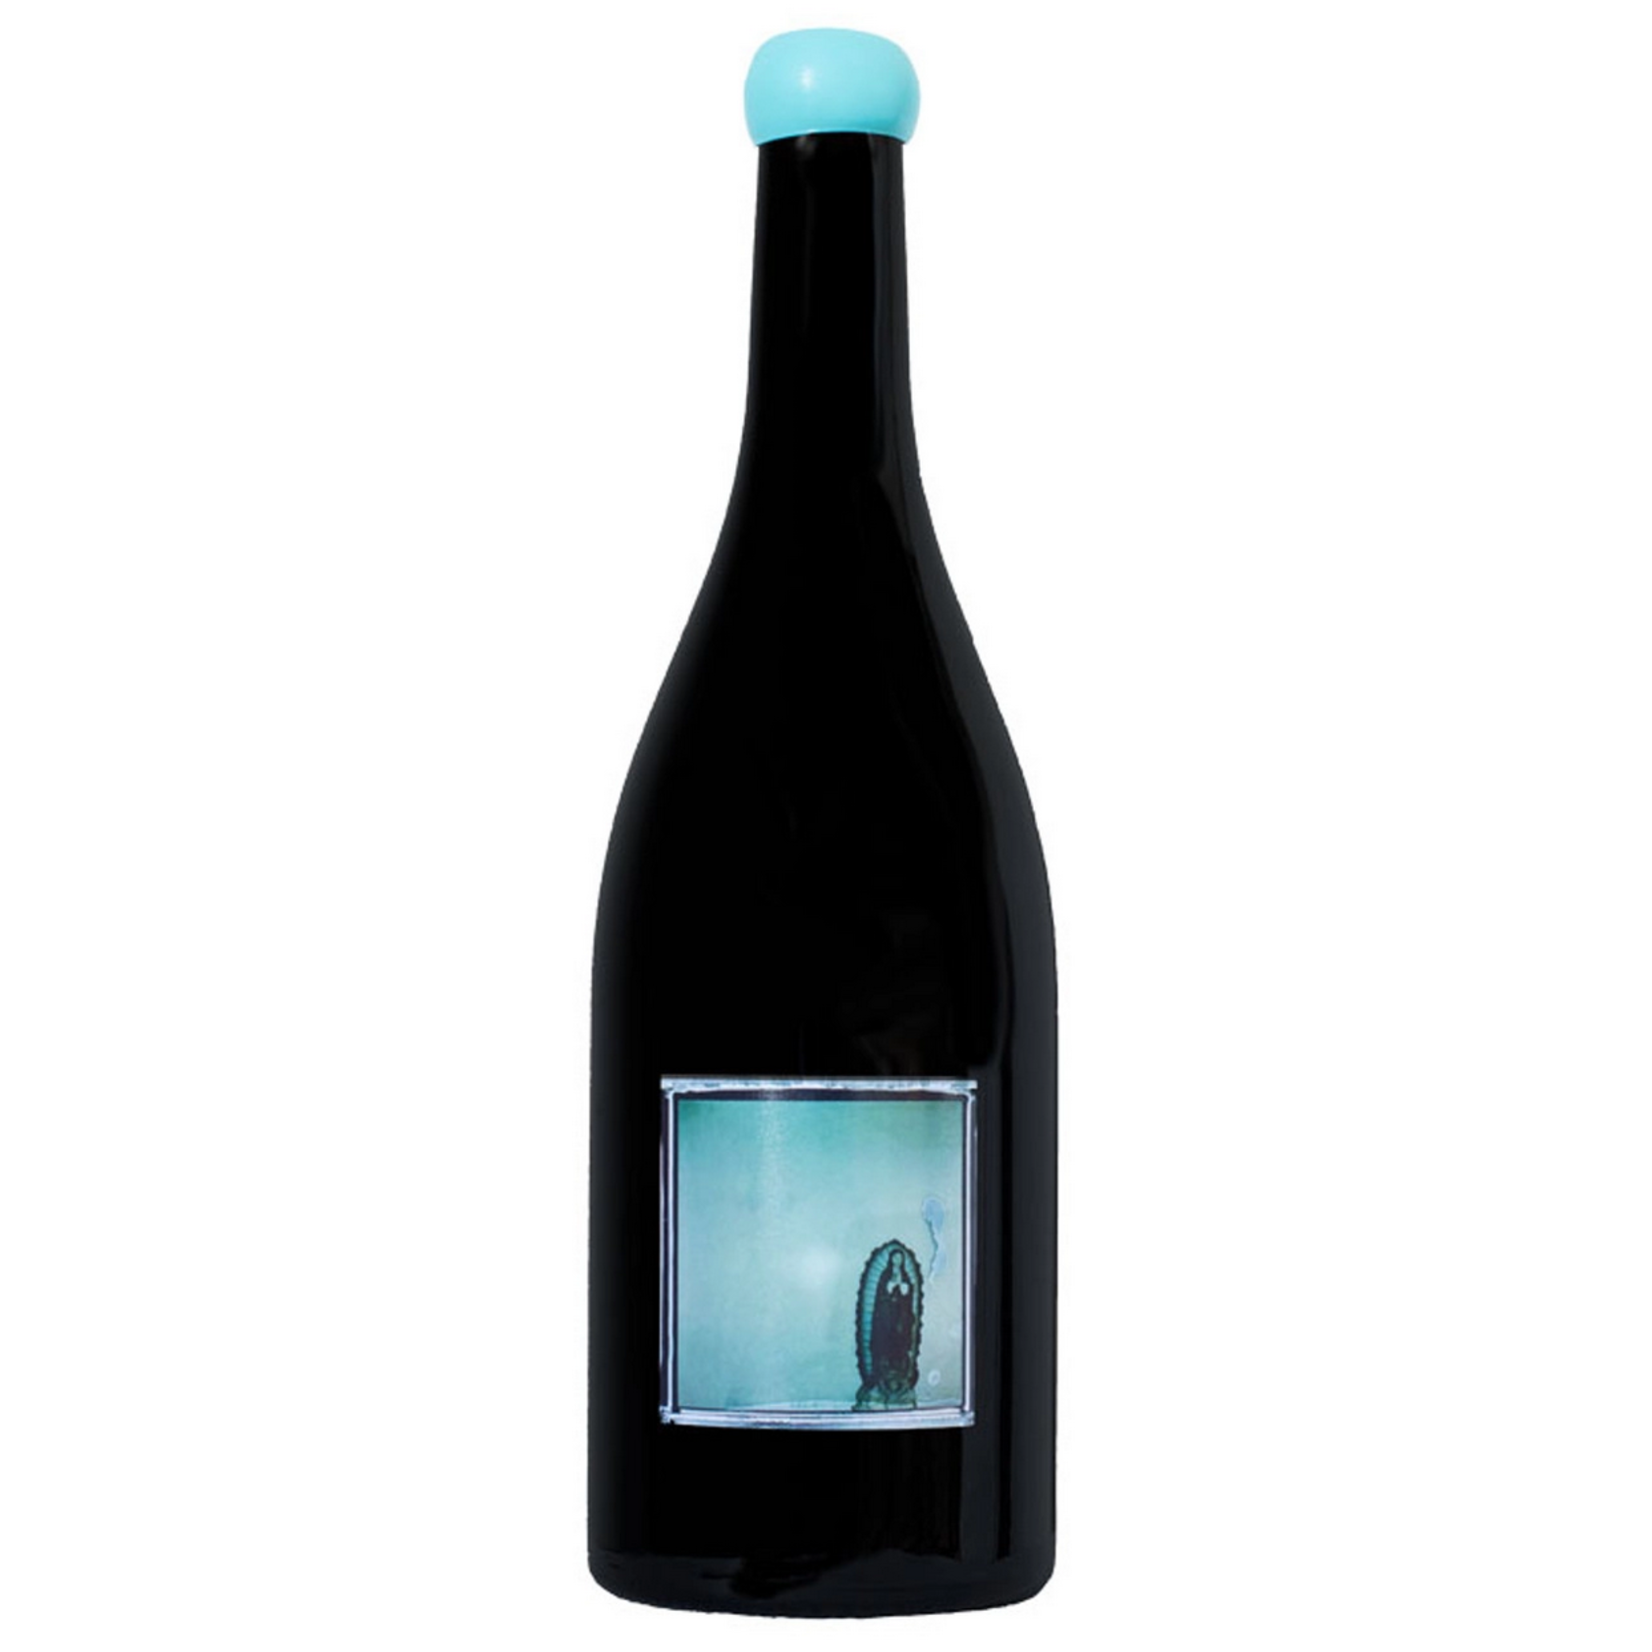 2021, Our Lady of Guadalupe Vineyard by Dave Phinney, Pinot Noir, Sta. Rita Hills, Central Coast, California, 14.8% Alc, CTnr